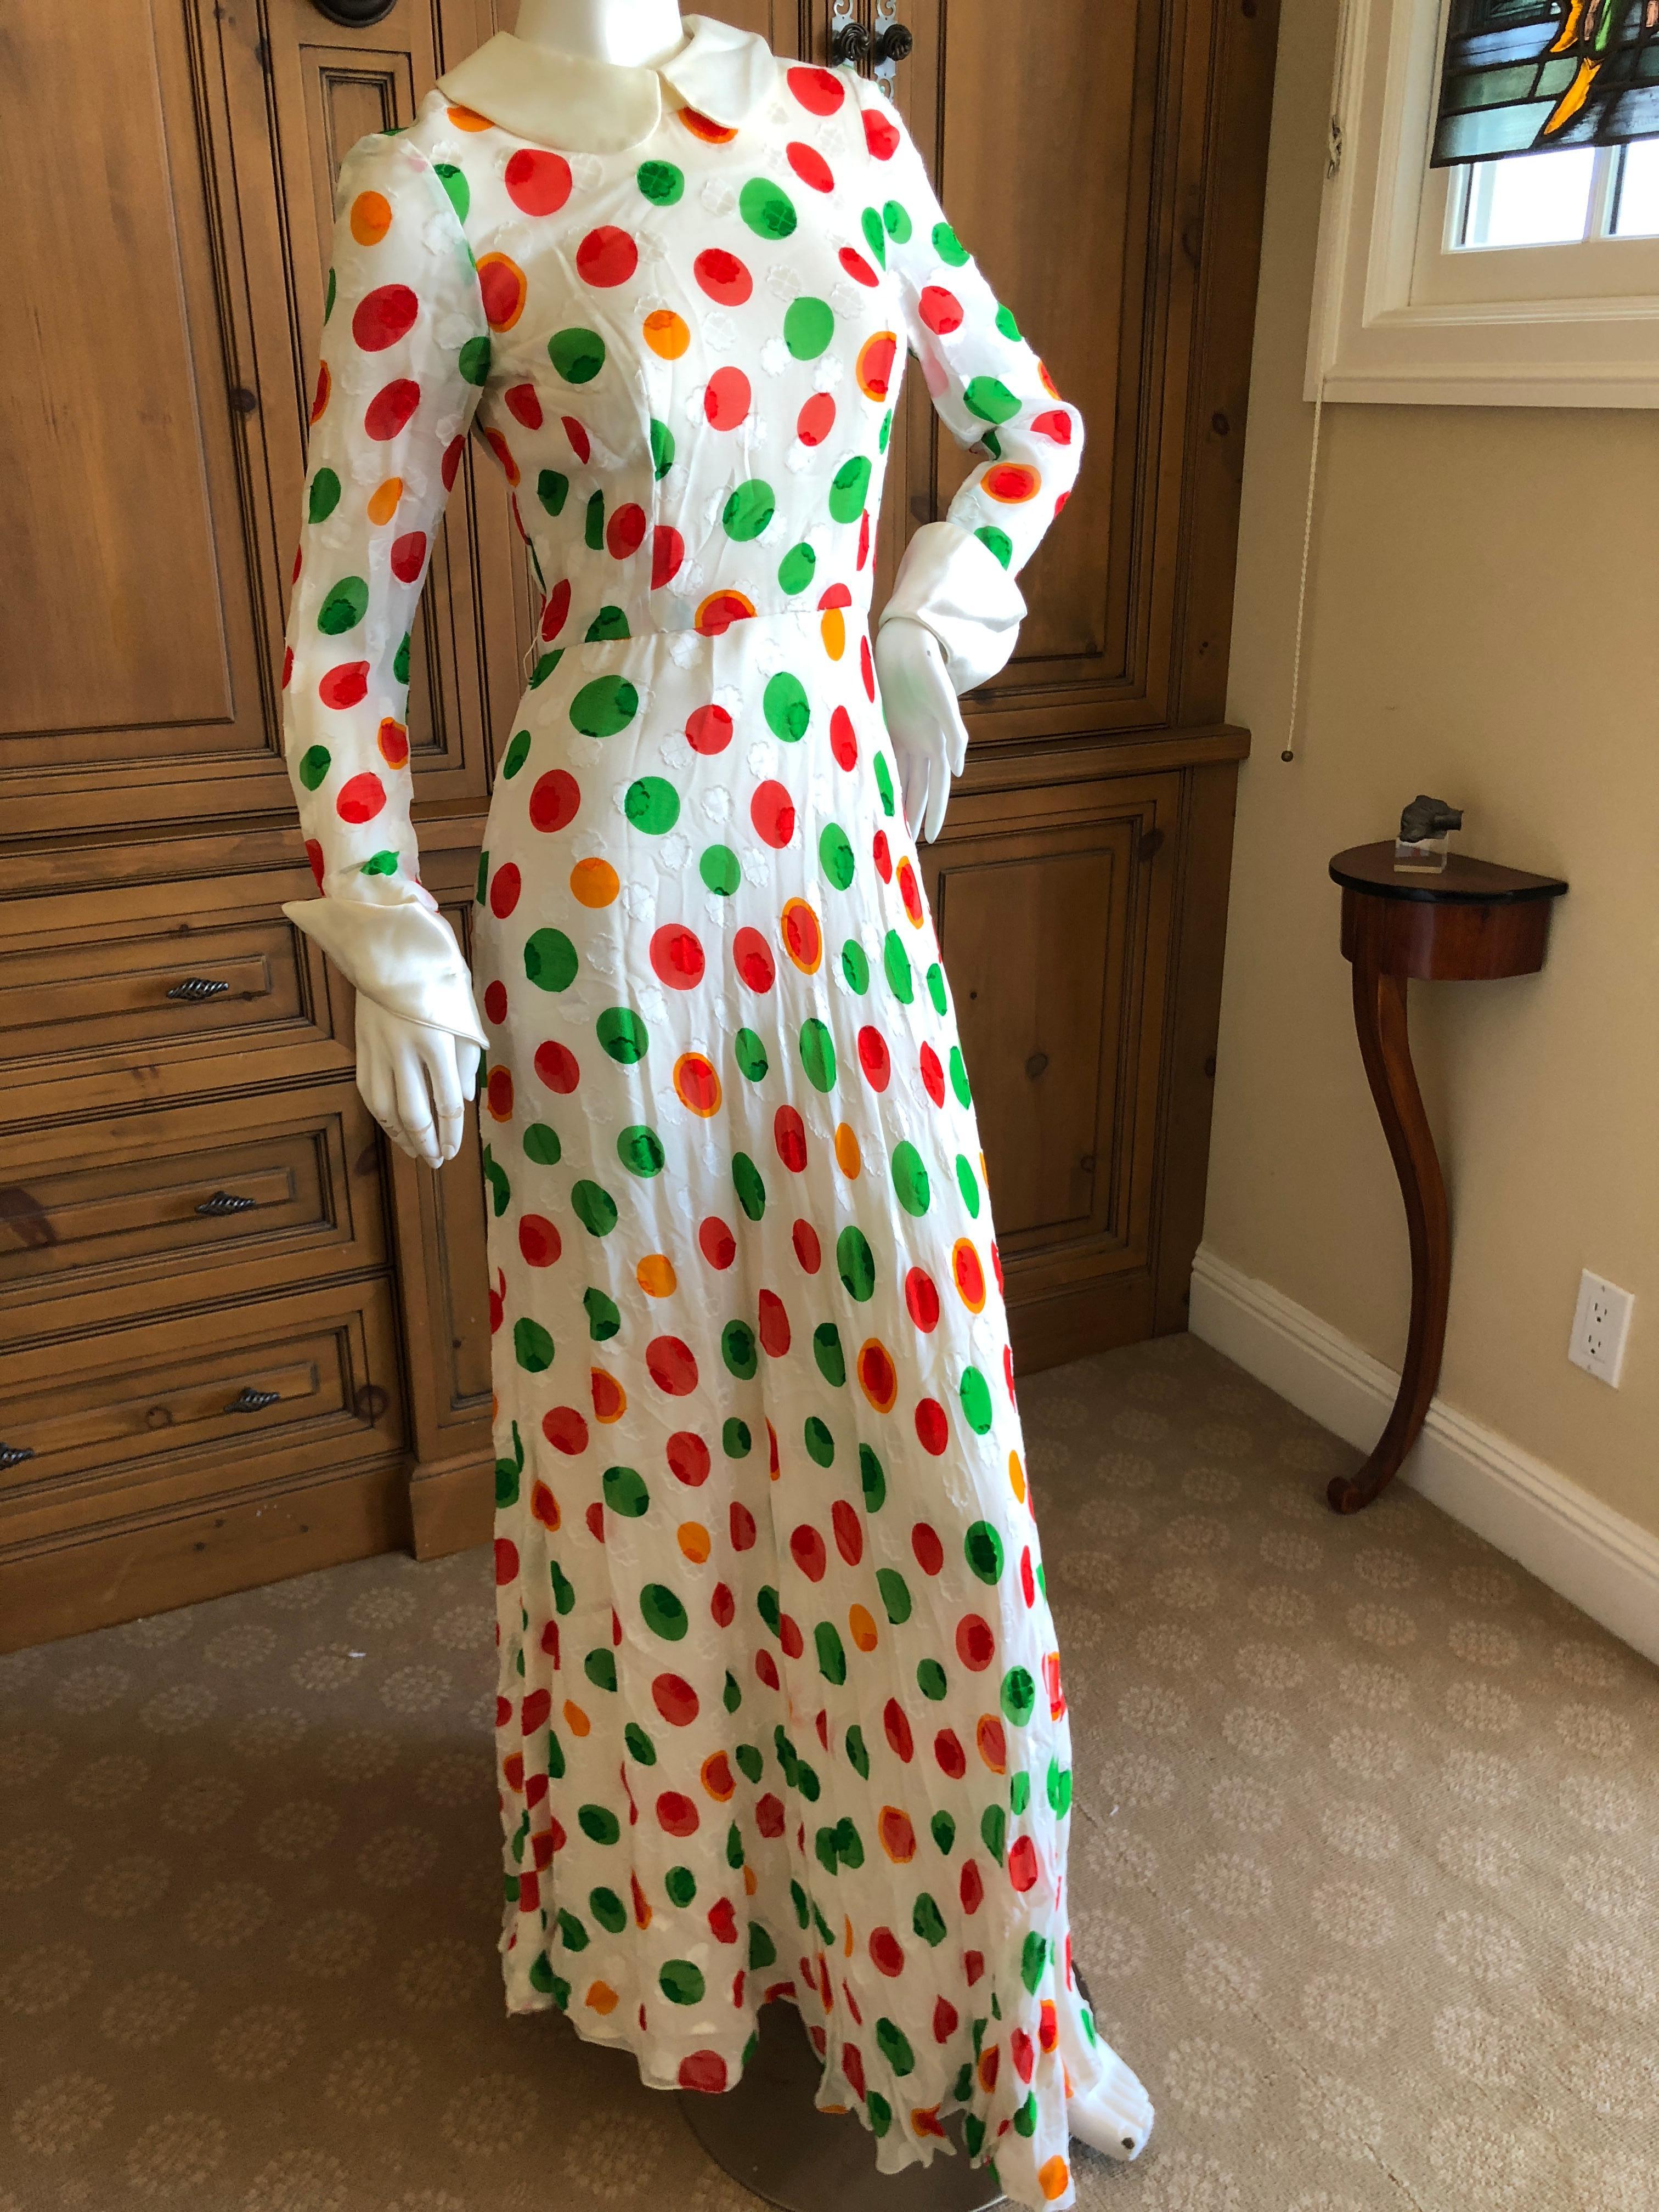 Cardinali 1970's Shamrock Pattern Polka Dot Silk Evening Dress.
The silk has shamrock's  , very suptle , all over.
There are three belt loops but no belt

From the Archive of Marilyn Lewis, the creator of Cardinali
Cardinali was founded in Los